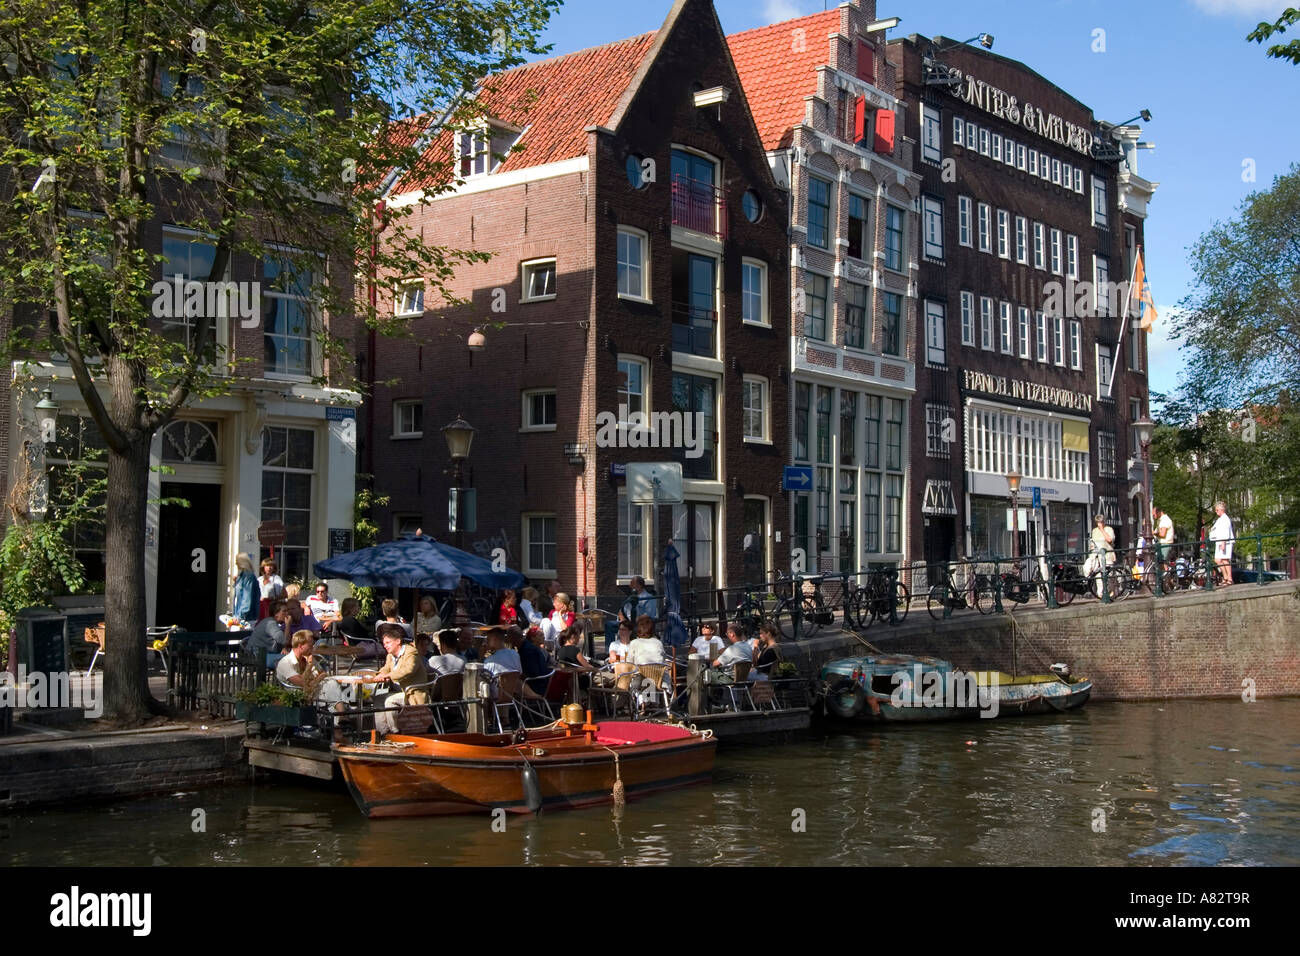 Amsterdam street cafe at a canal typical architecture Stock Photo